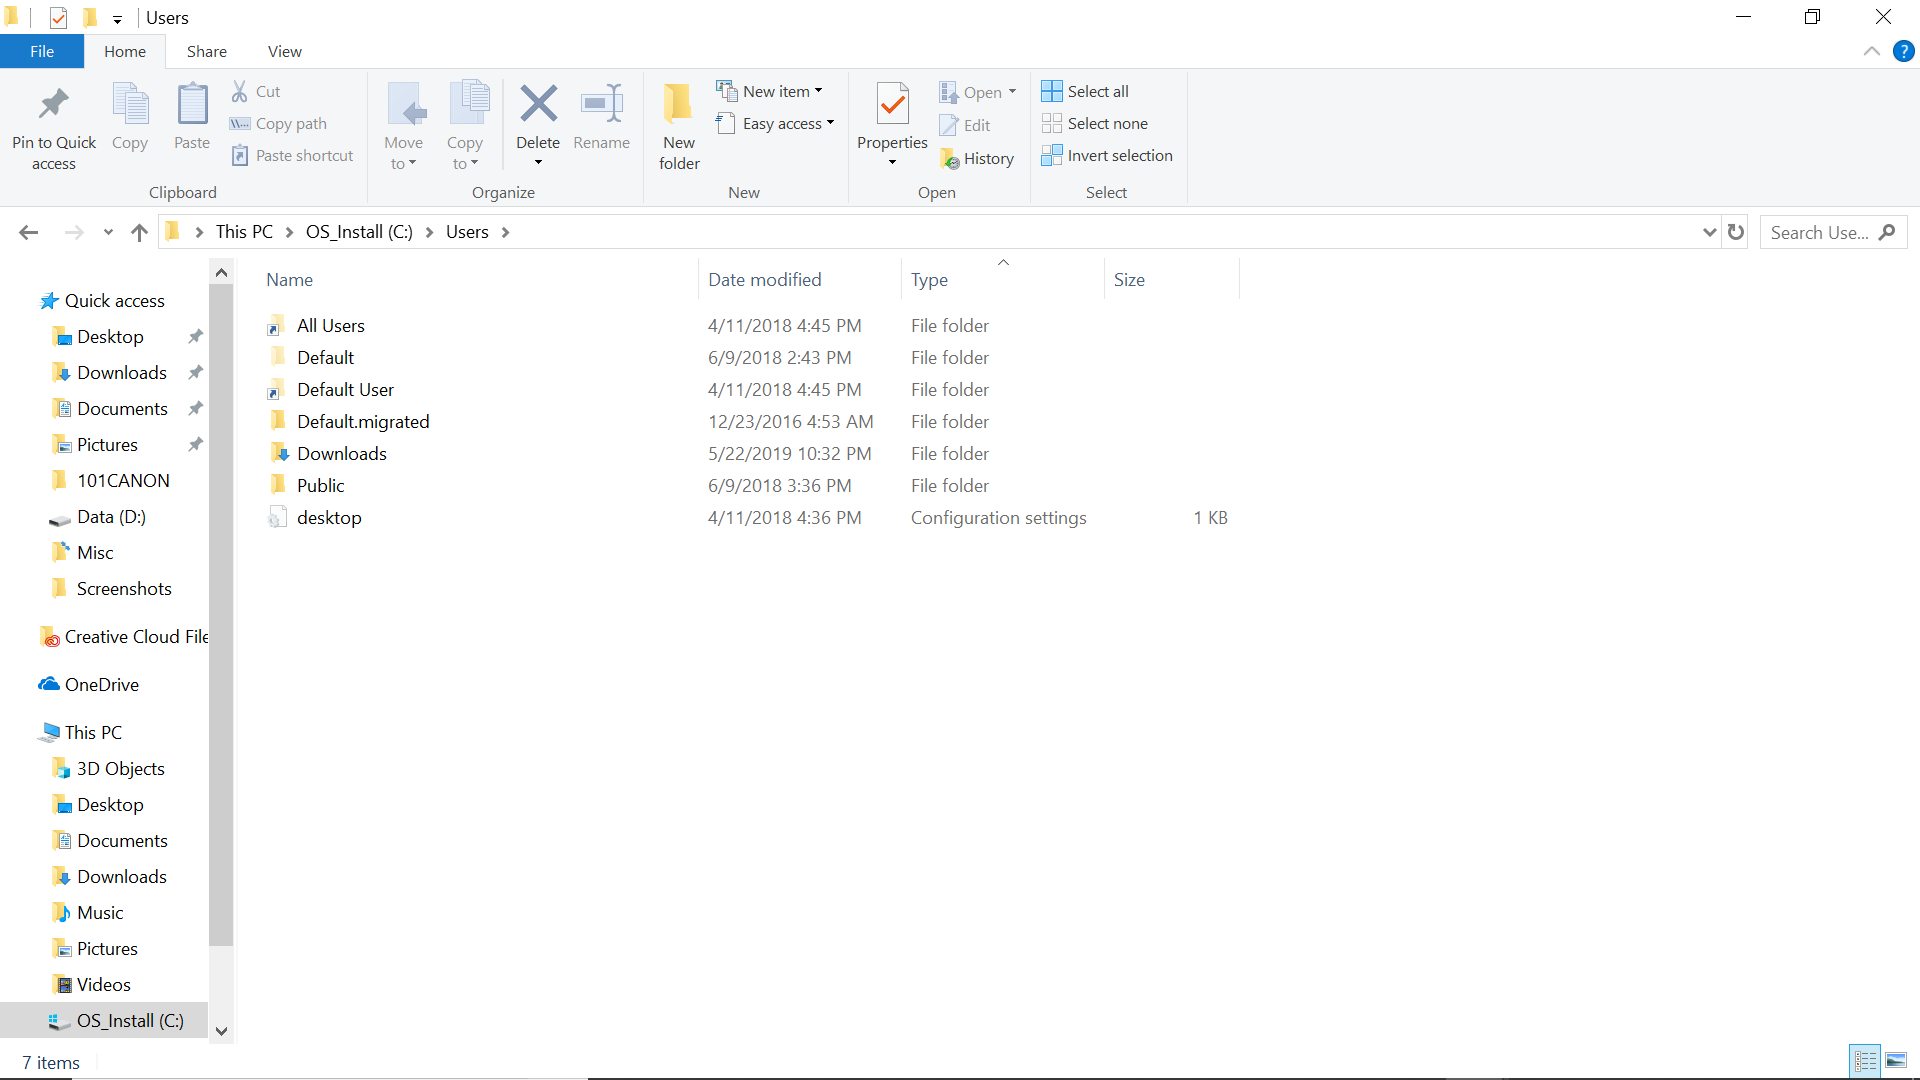 I accidently merged My User folder and My Downloads folder. d83c2e72-d906-4cee-8359-e706e64d3e14?upload=true.png